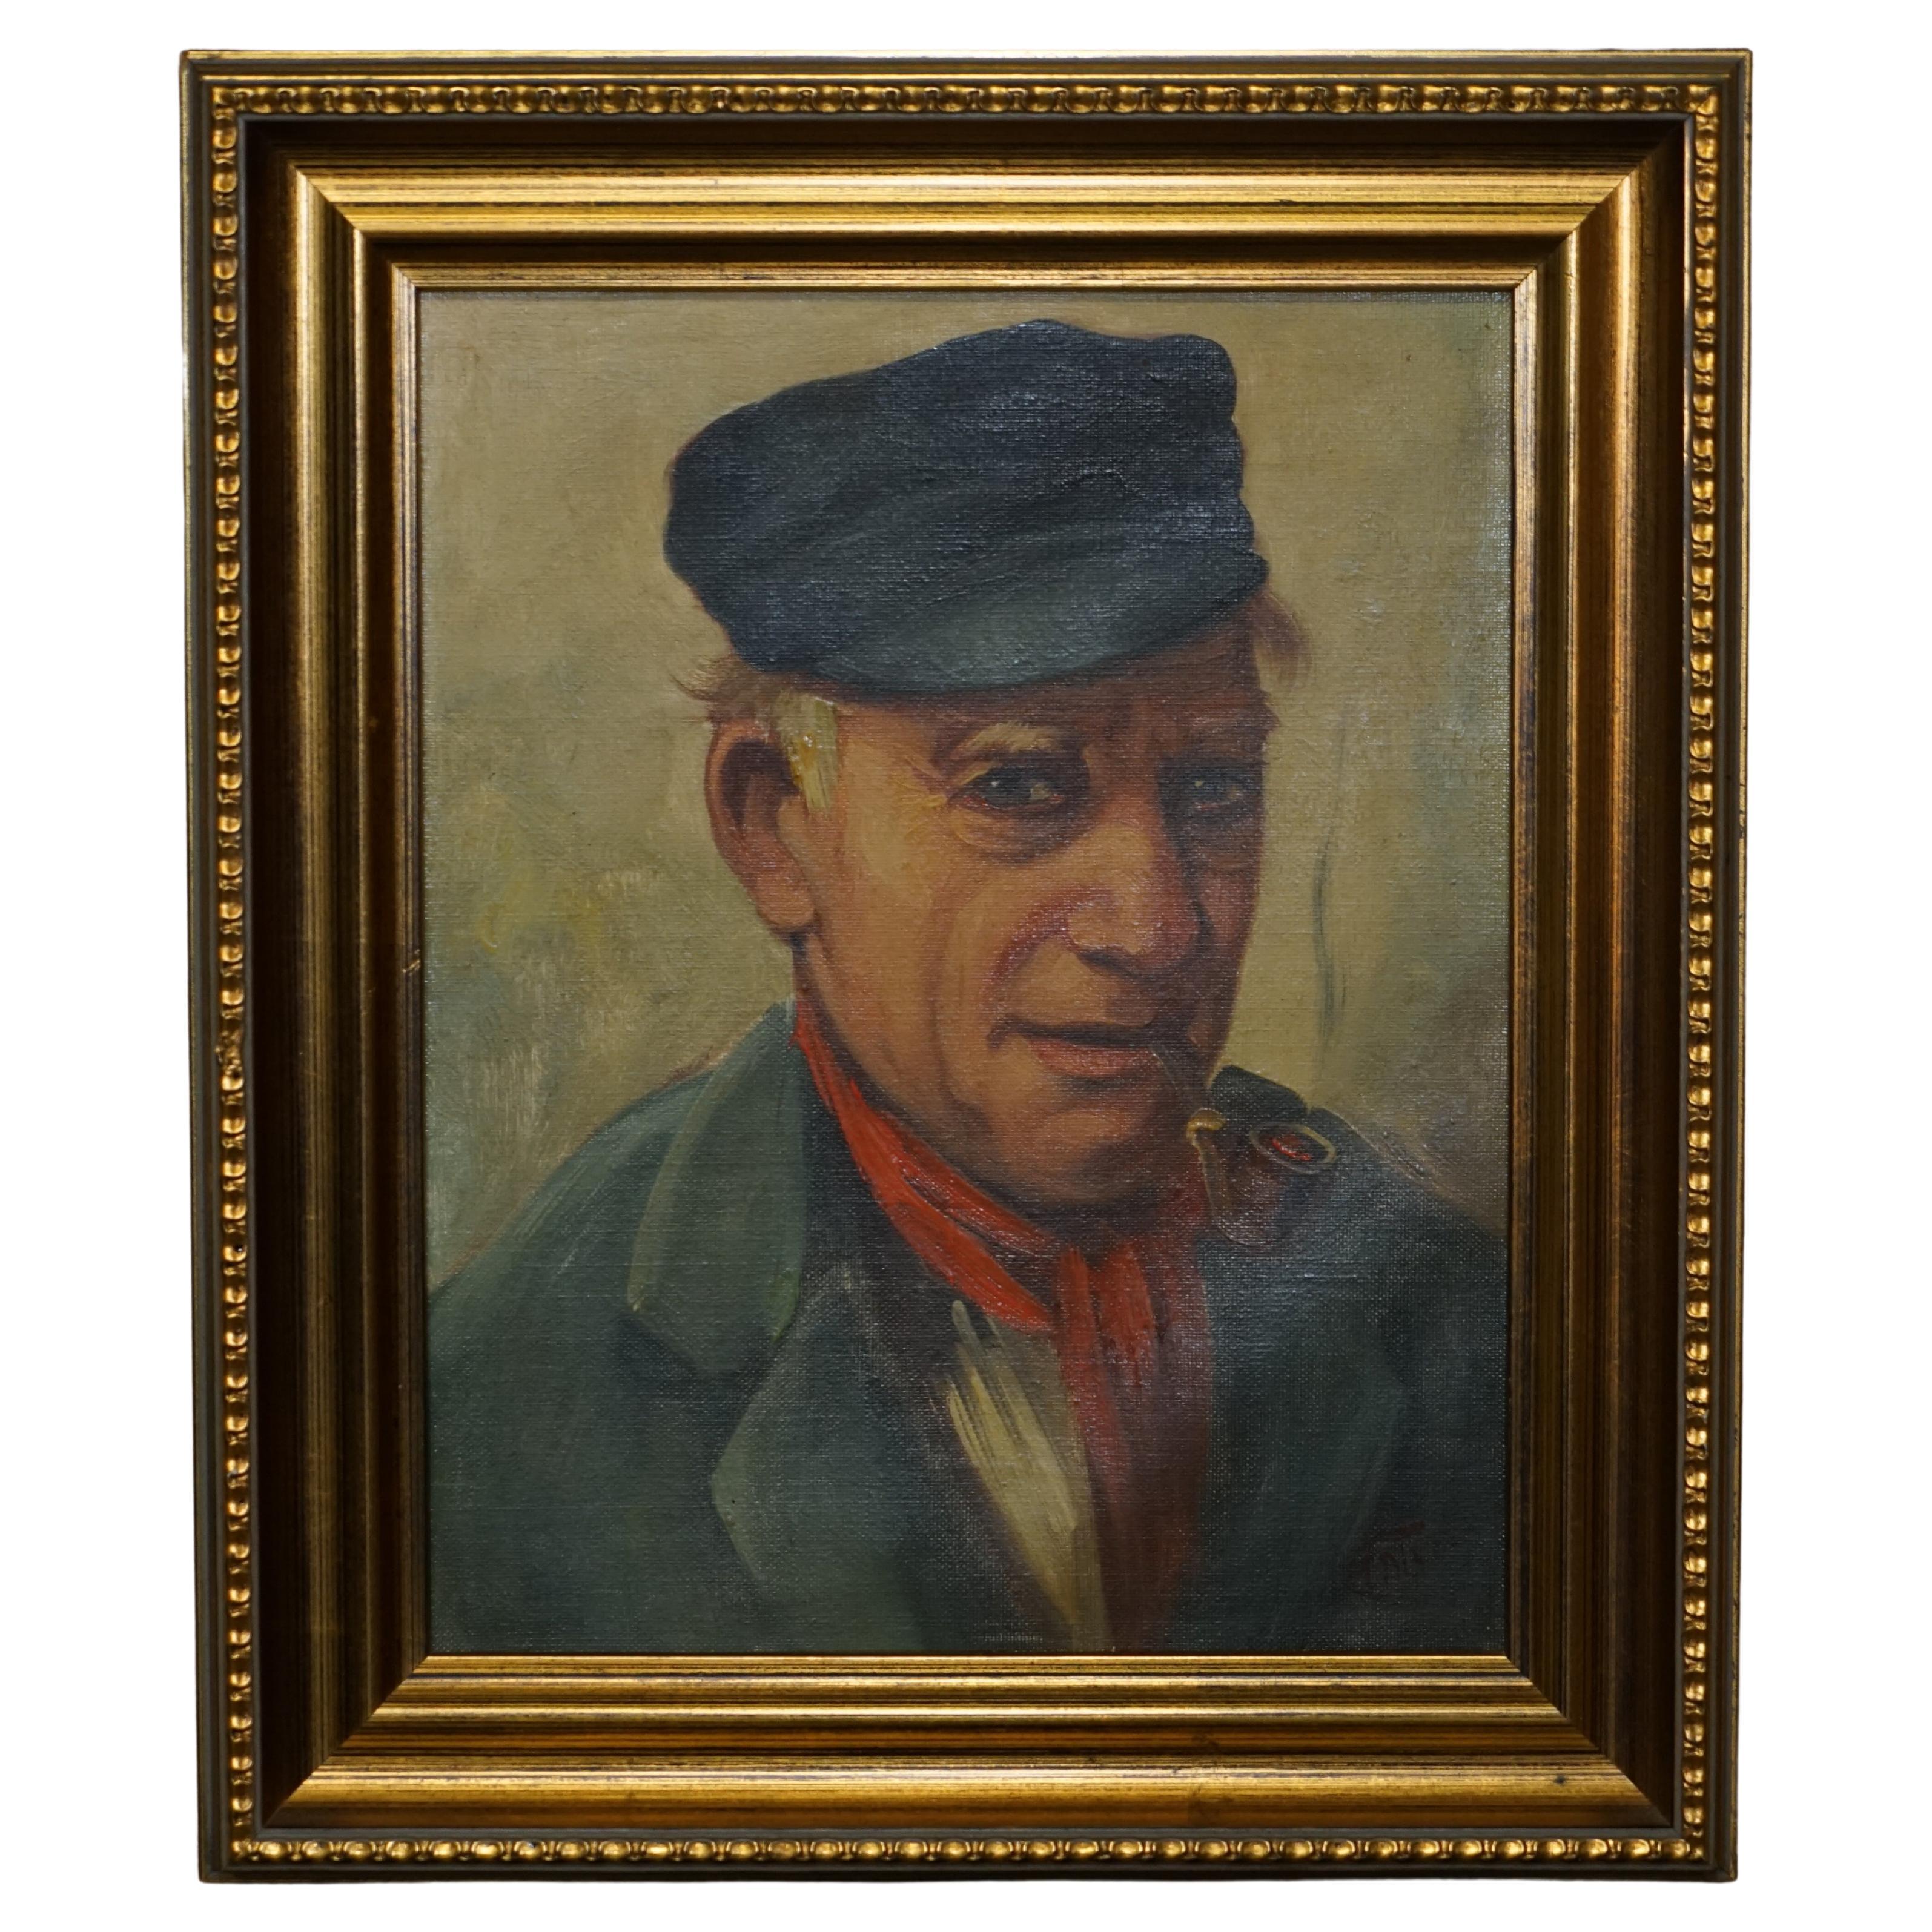 Antique Signed Dutch Oil on Canvas Painting of Old Man Fisherman Smoking a Pipe